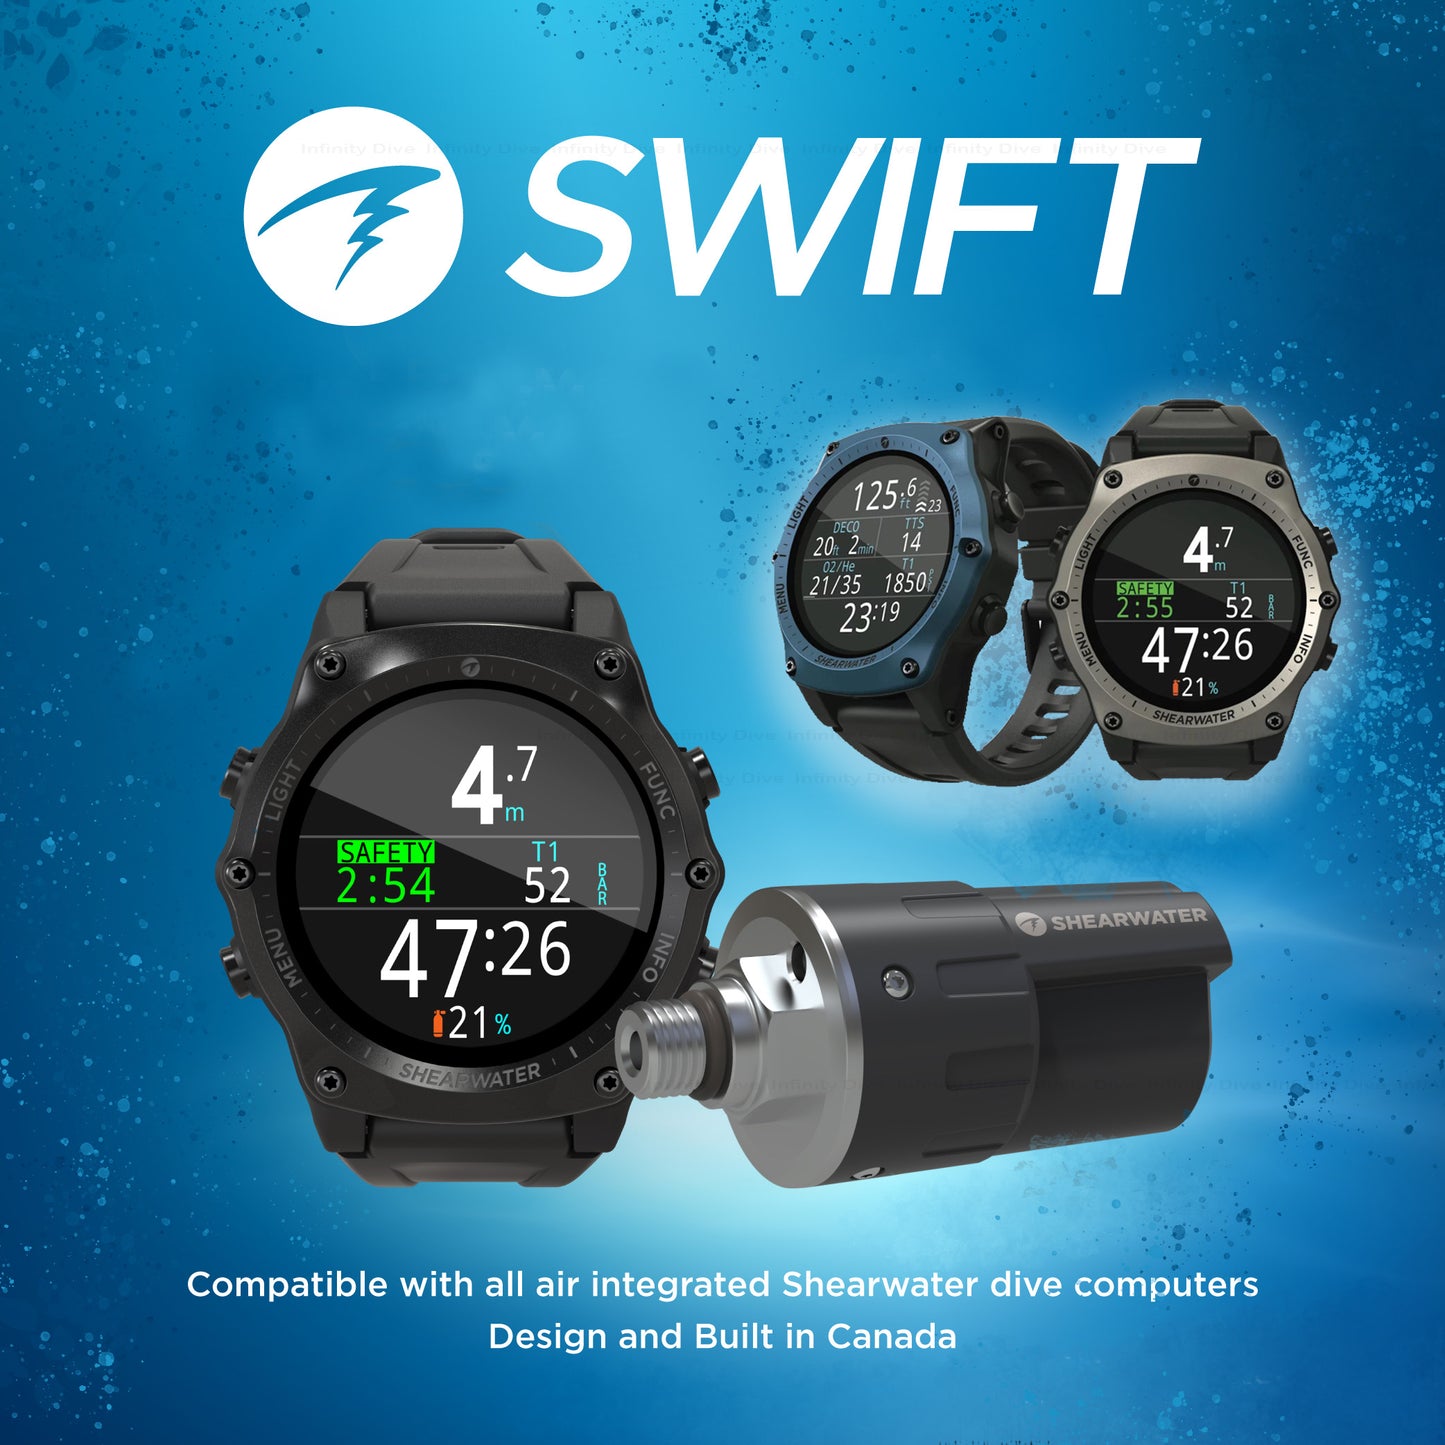 Shearwater Teric Dive Computer With Optional Swift Smart Transmitter